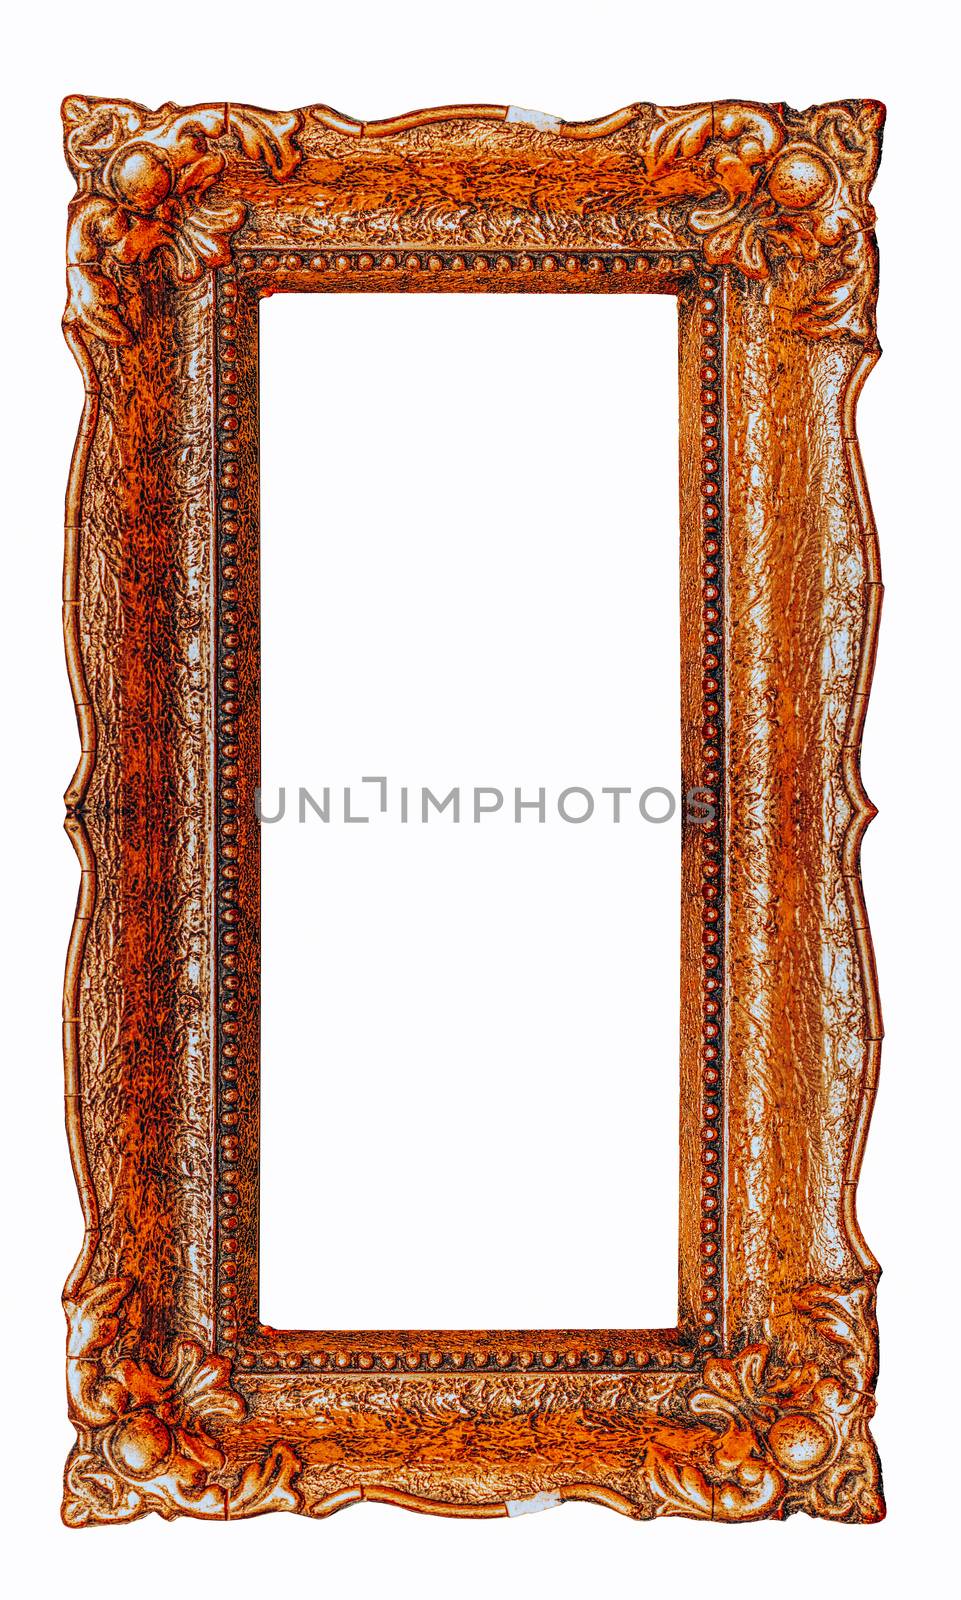 Vertical copper ornate picture frame with white background - Stock image design element